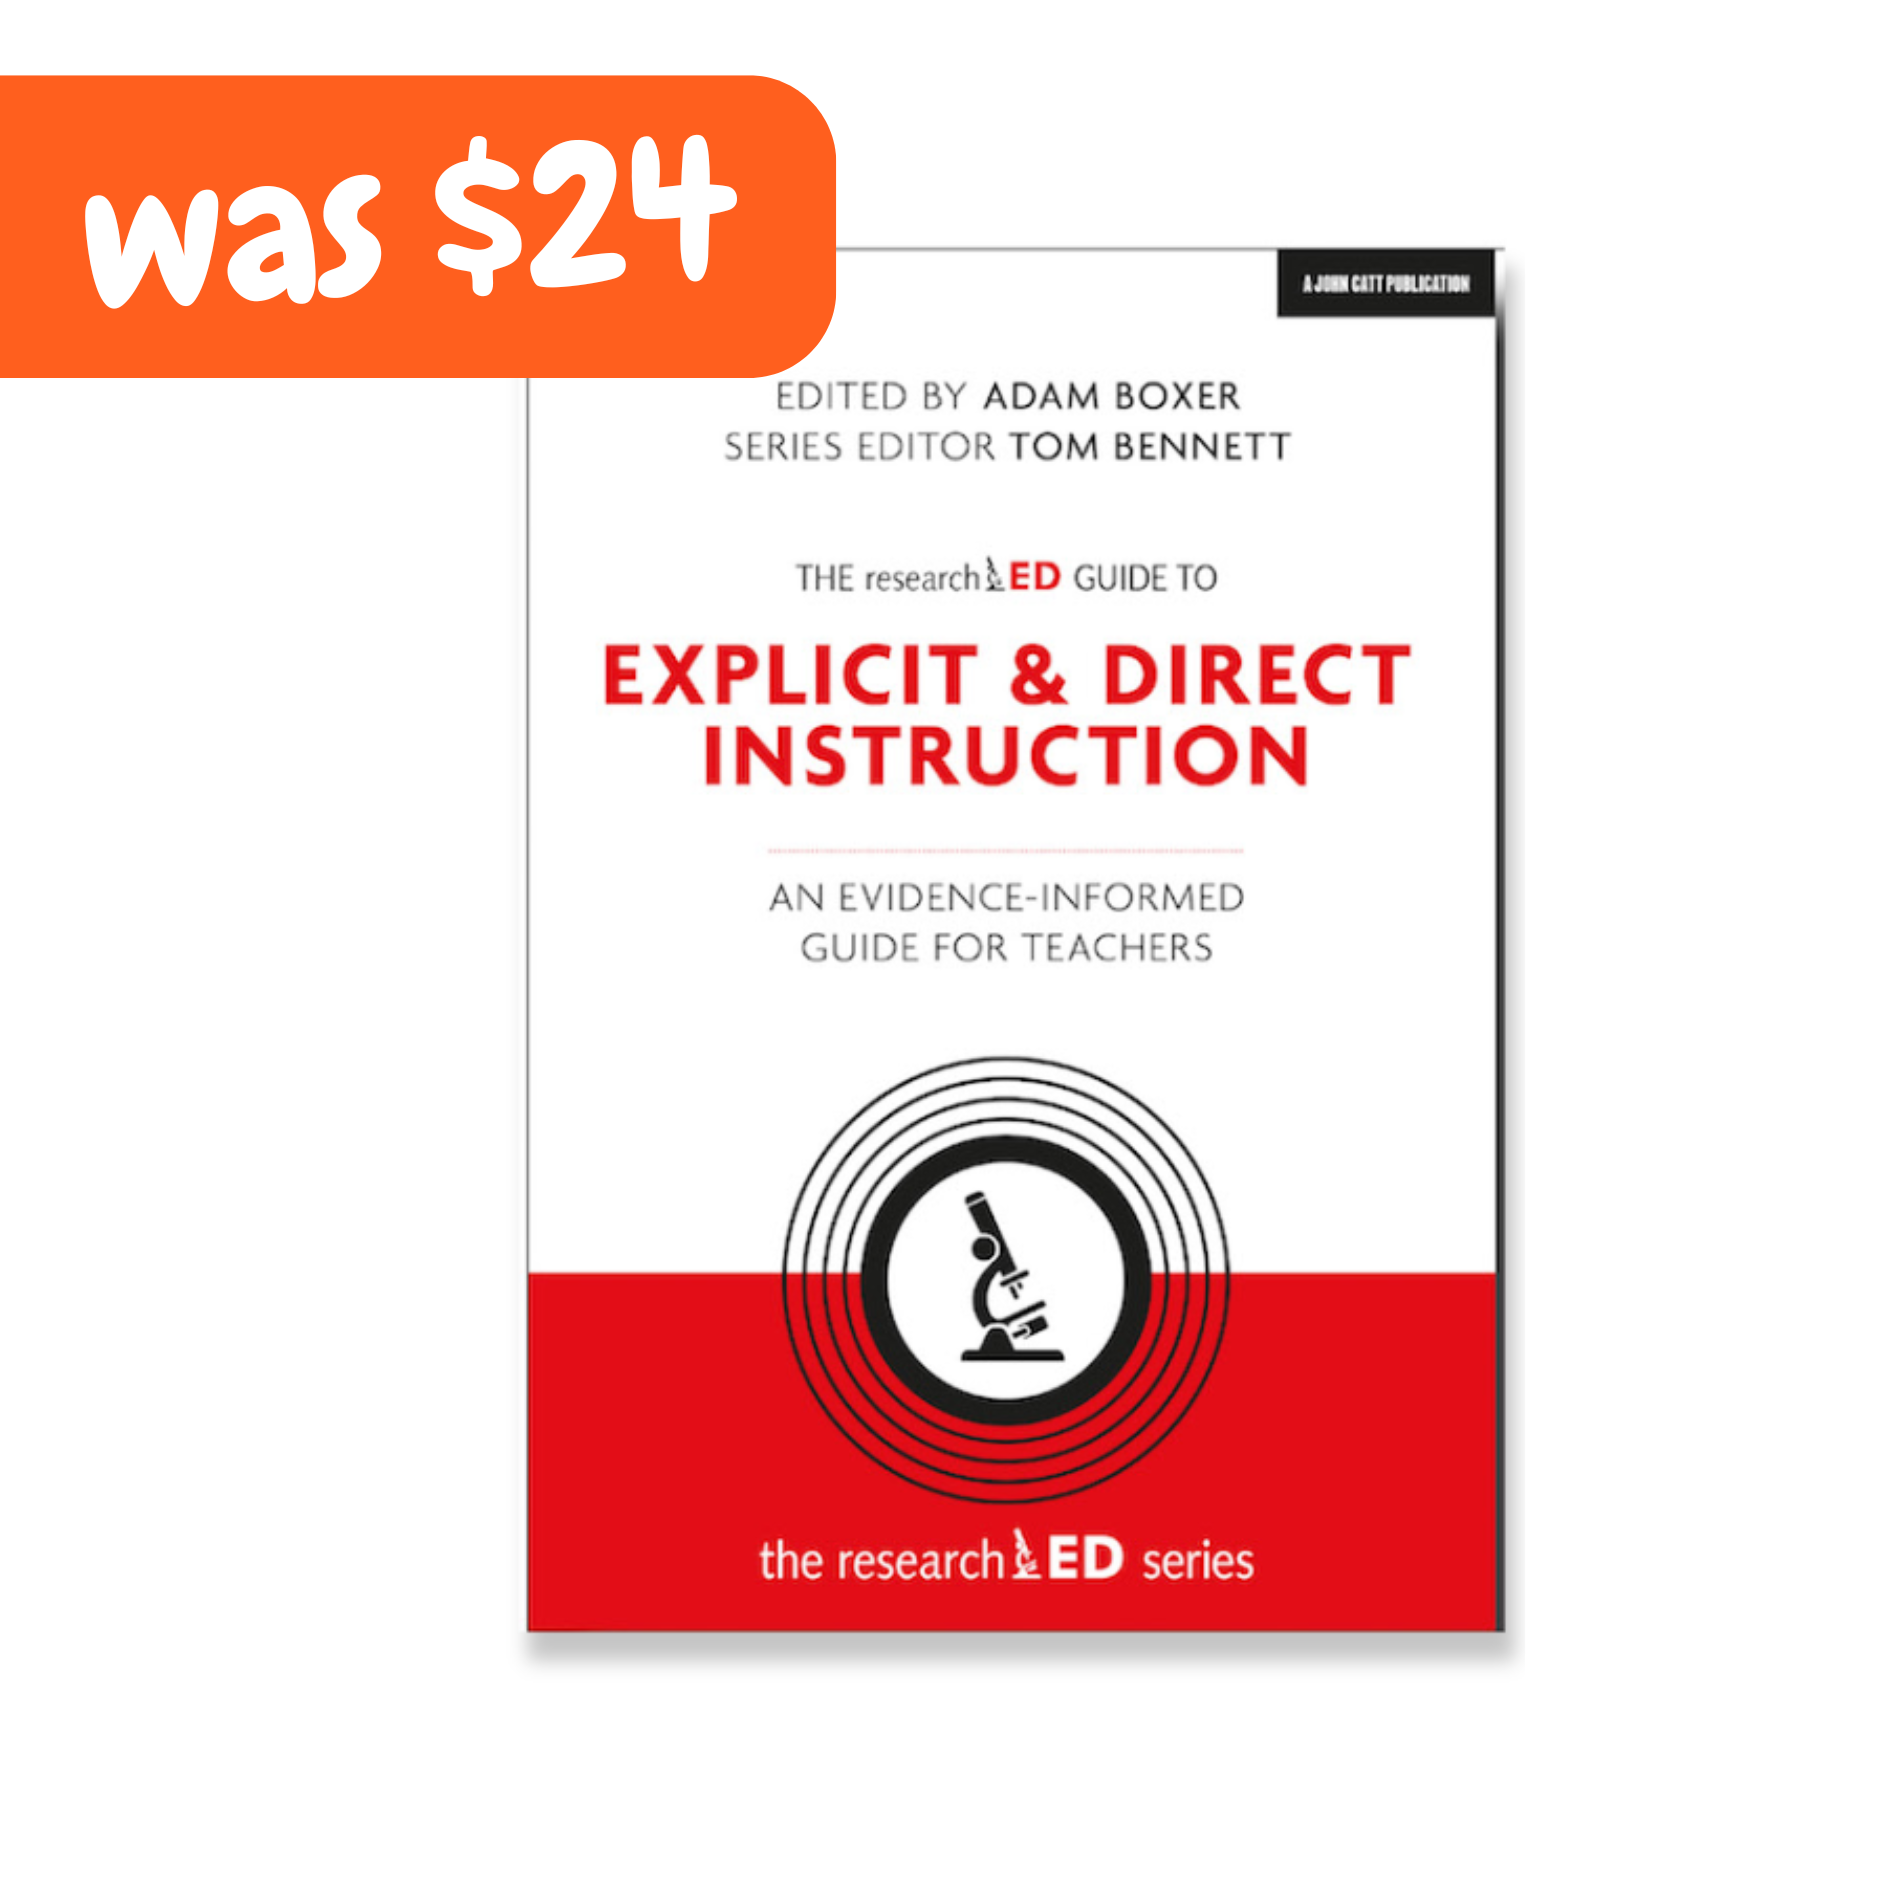 The researchED guide to Explicit & Direct Instruction